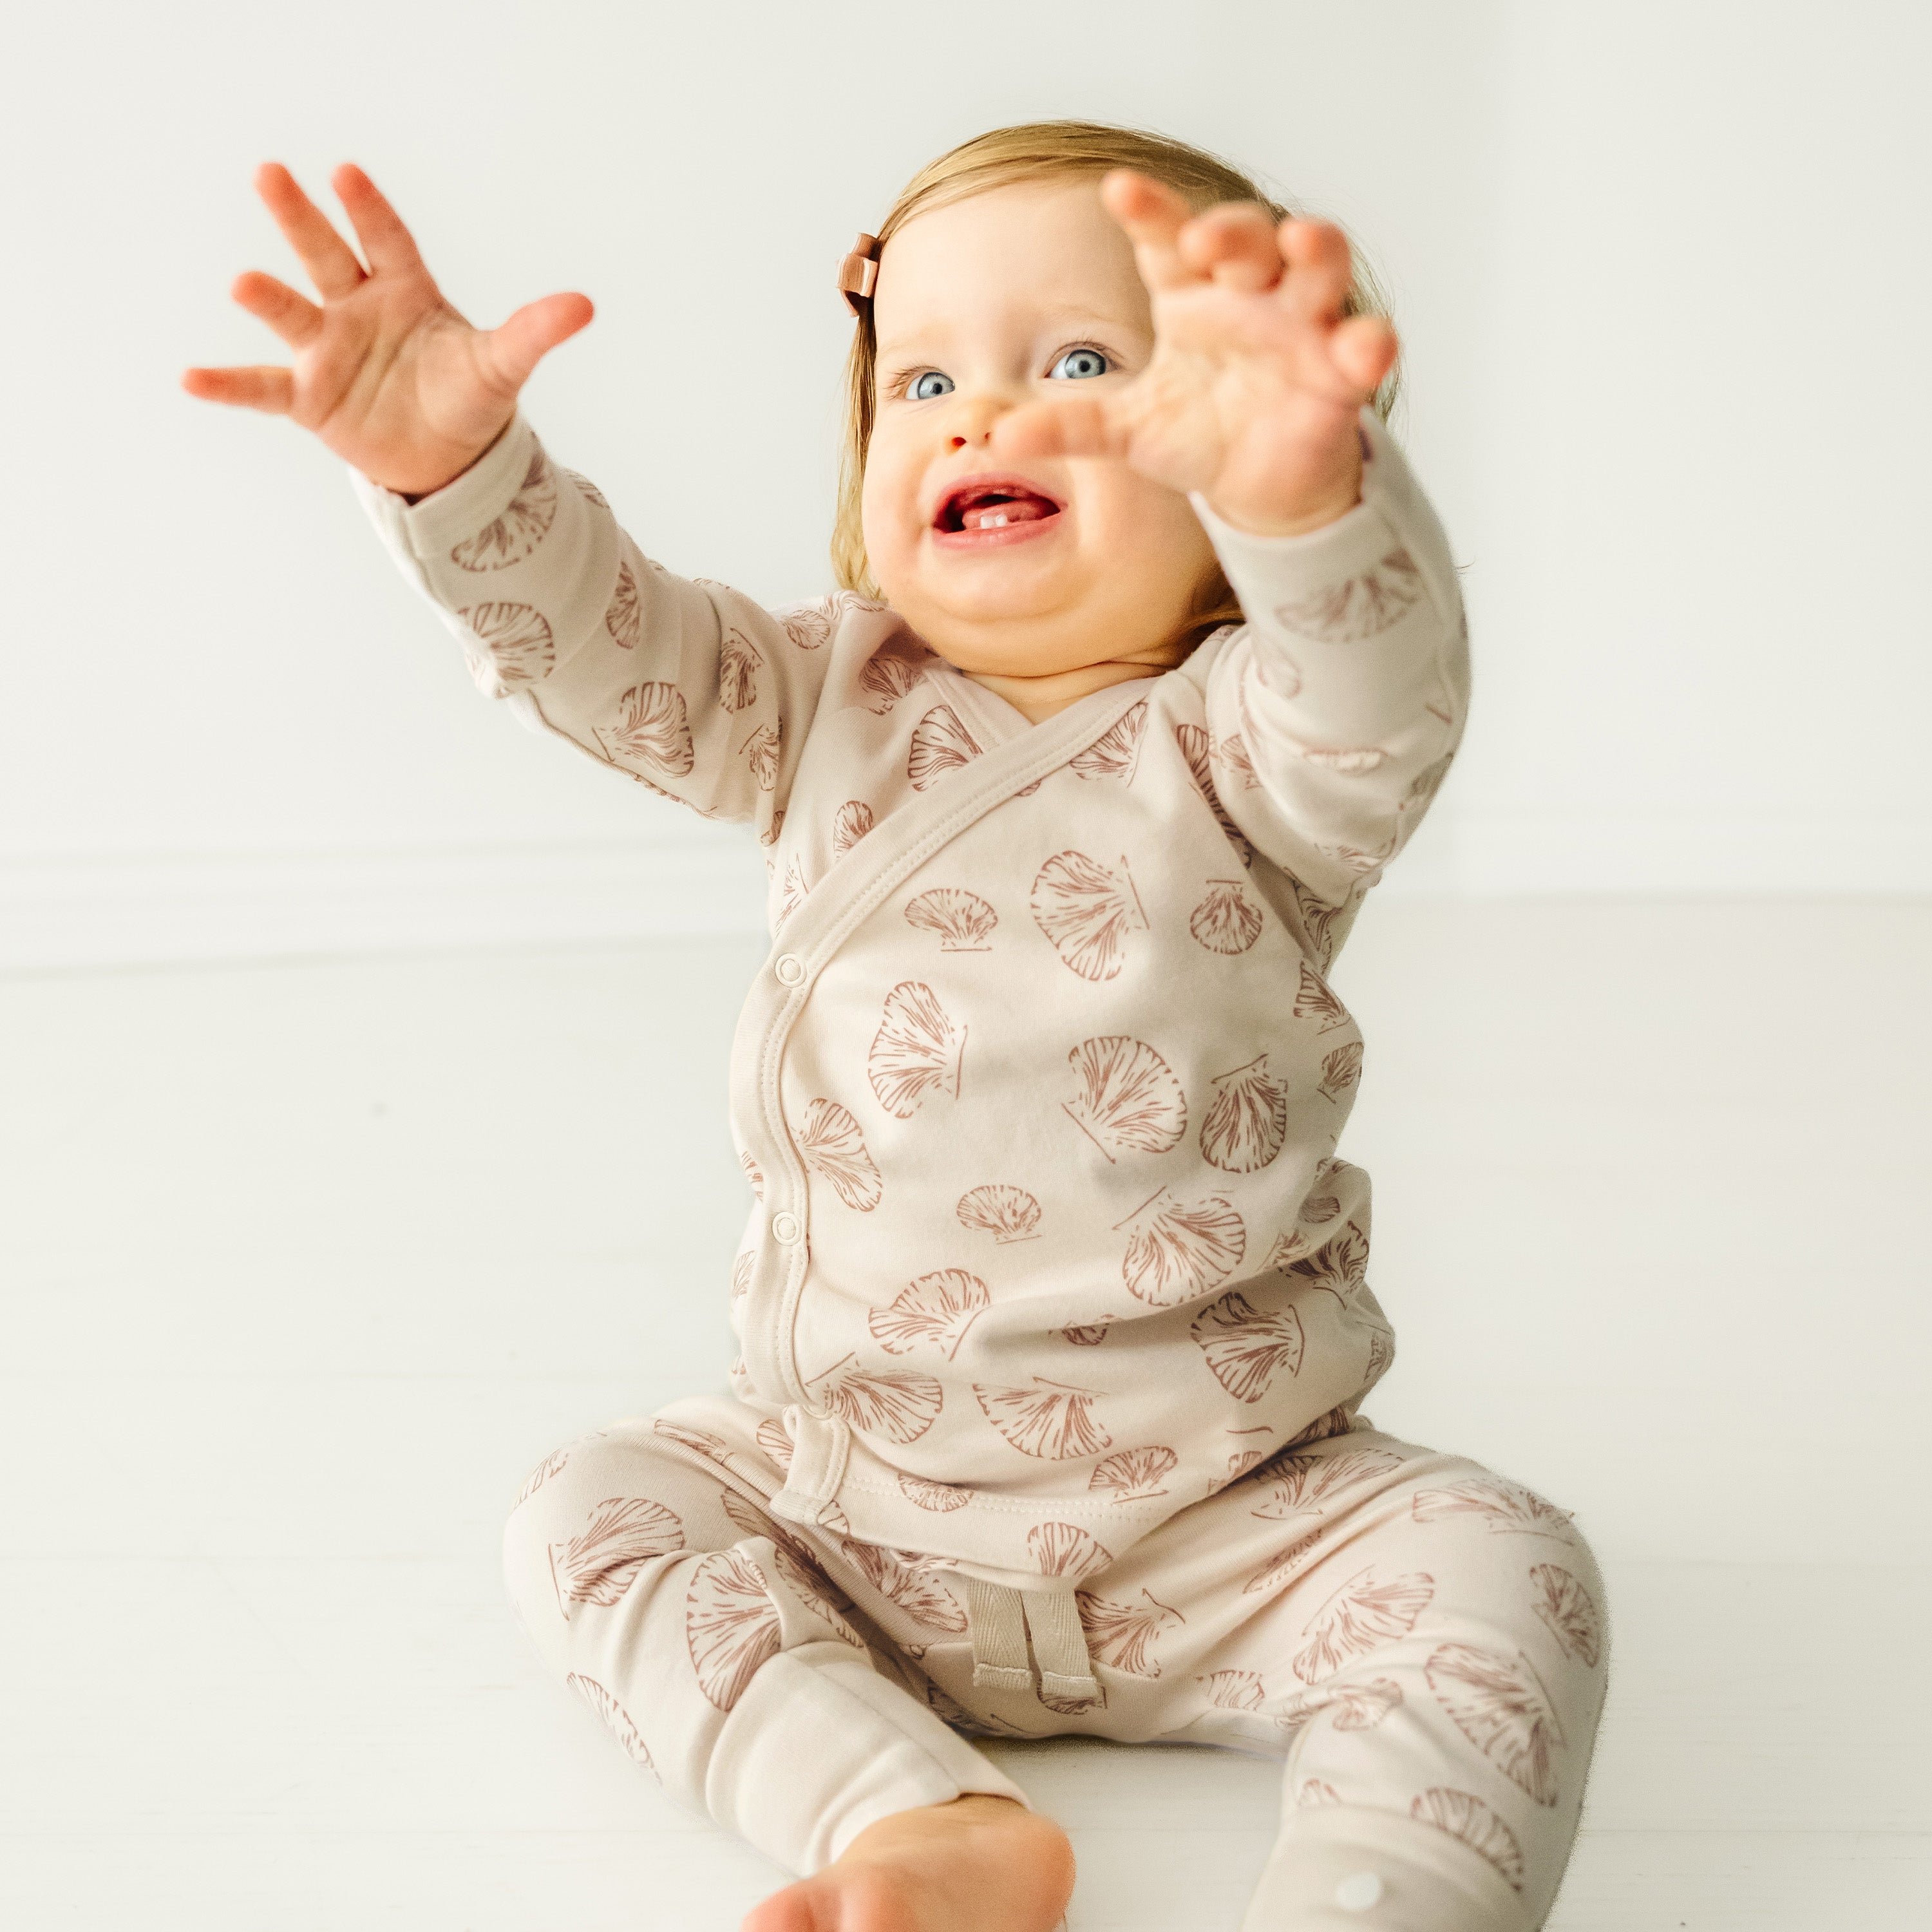 A joyful toddler in a Makemake Organics Organic Kimono Top & Pants Set - Seashells patterned with leaves reaches up with both hands, smiling widely, seated against a plain white background.